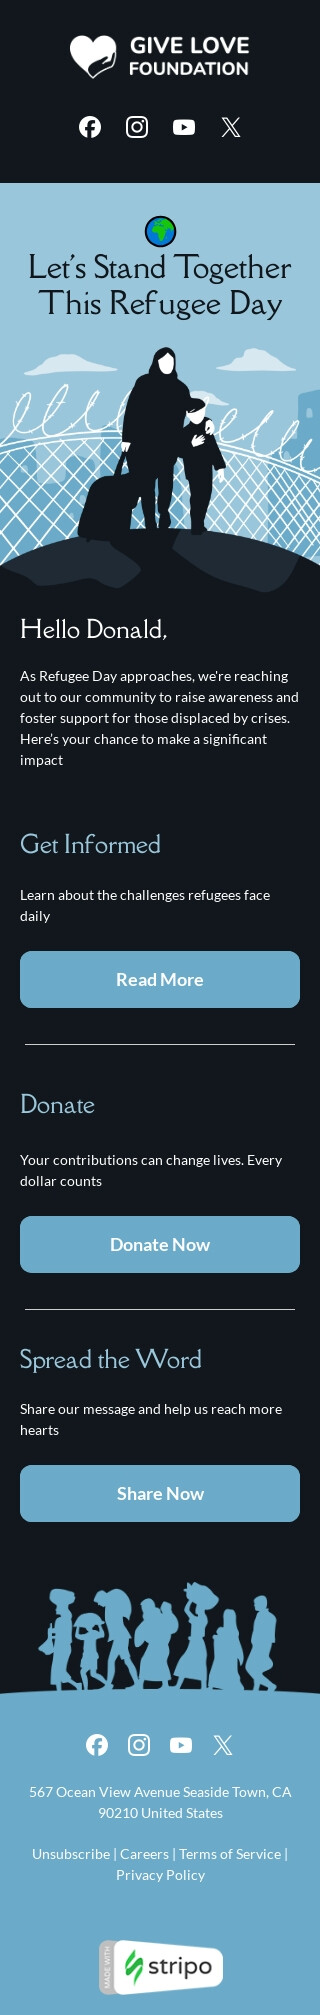 World Refugee Day email template "Let's stand together" for fundraising industry mobile view